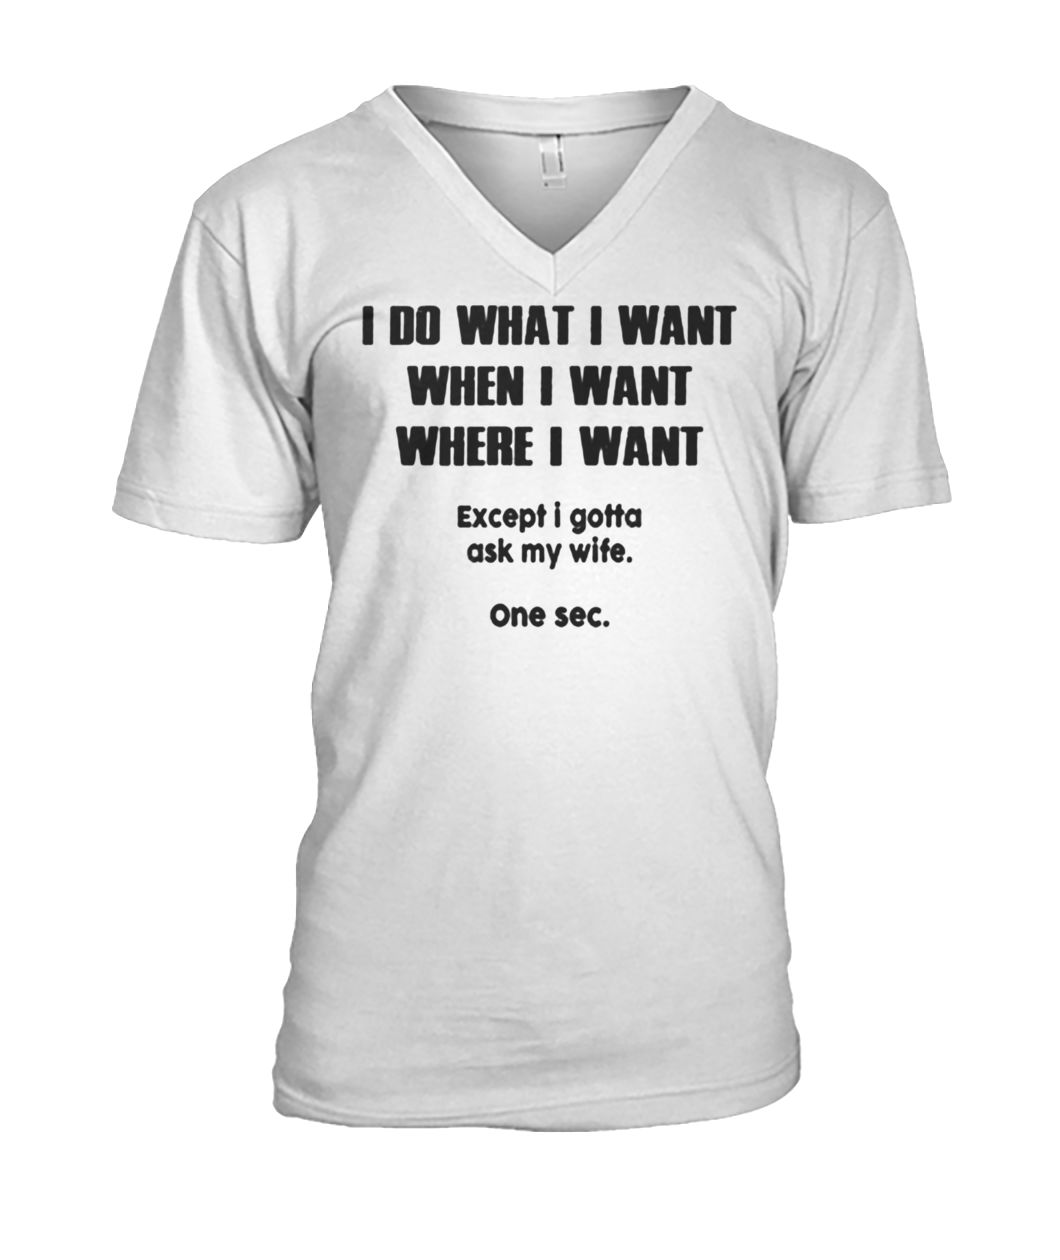 I do what when where I want except I gotta ask my wife mens v-neck